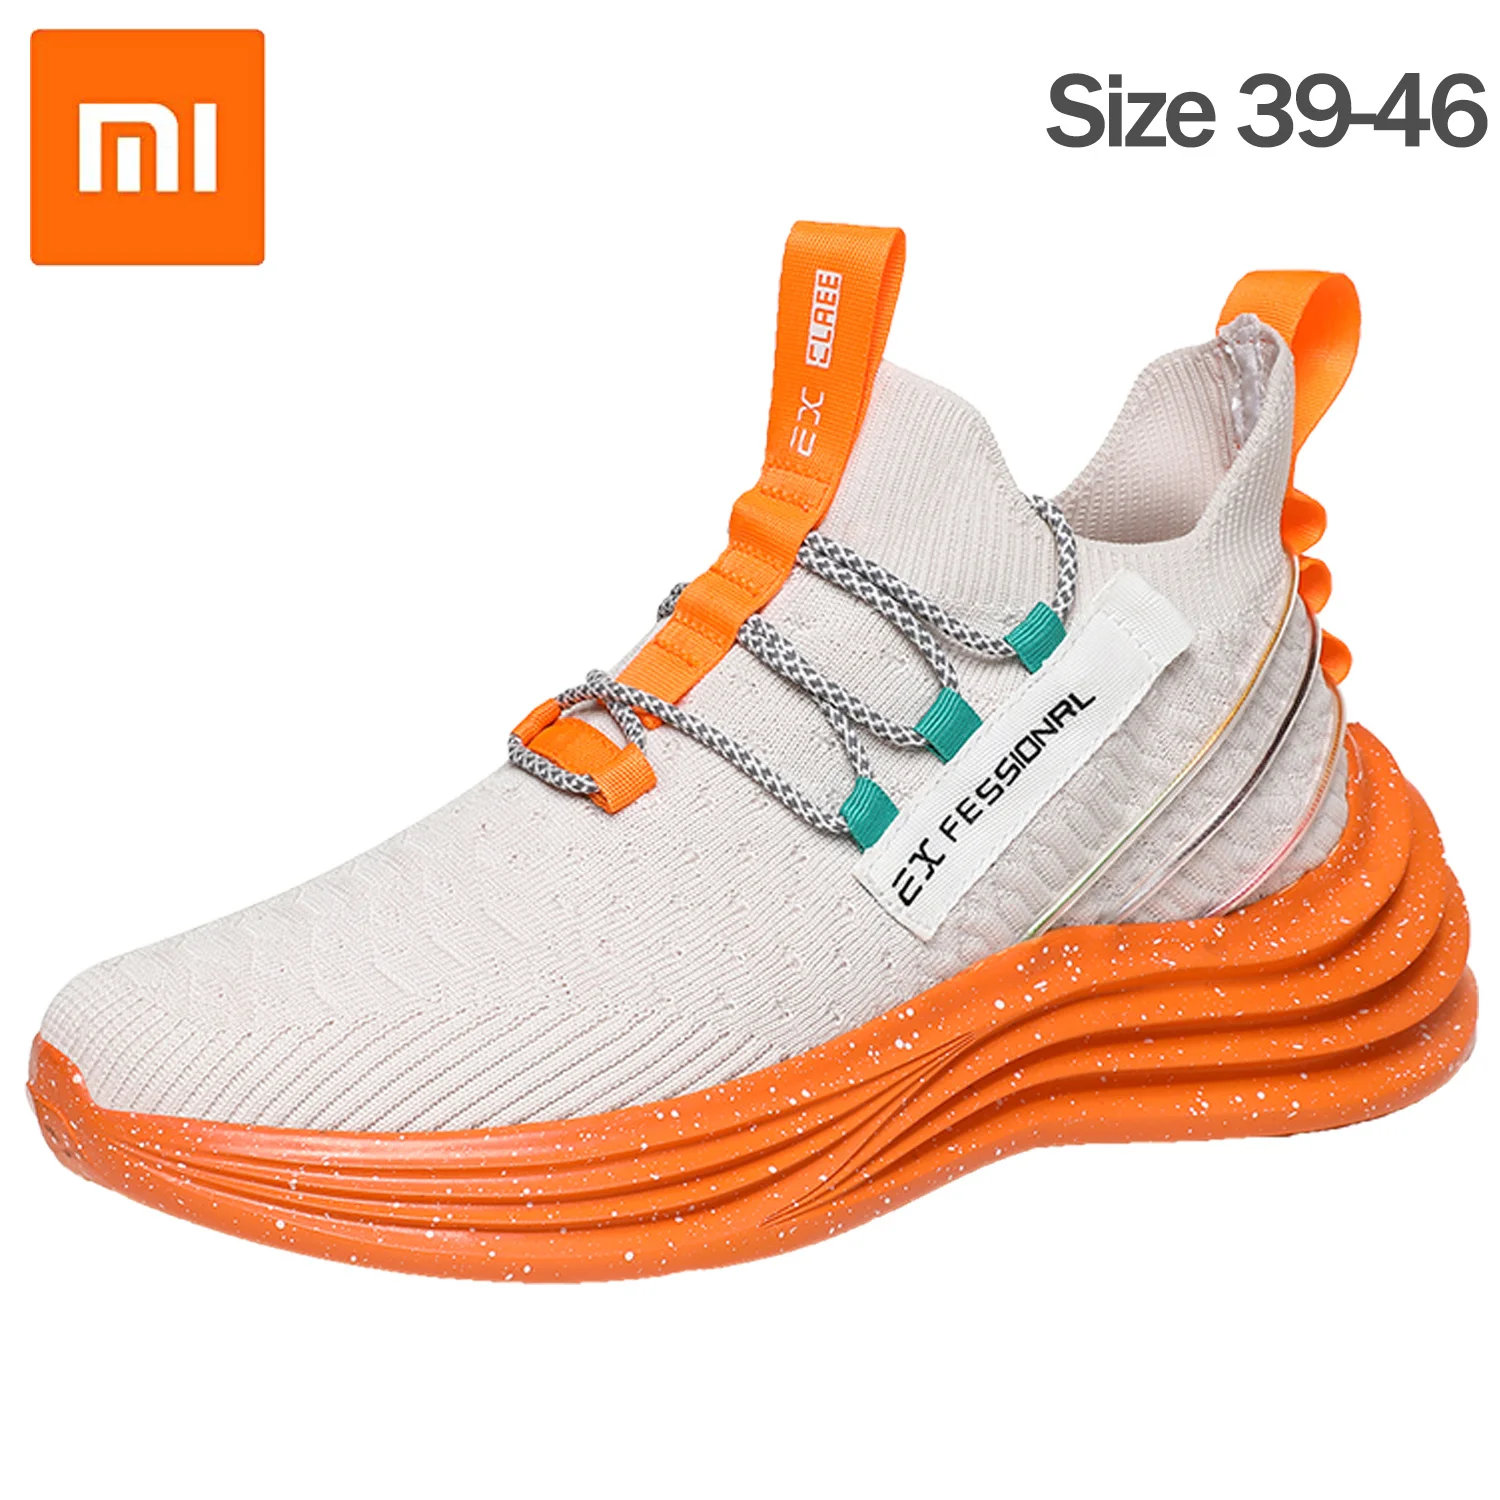 Xiaomi Blade Sneakers Men Super Light Breathable Flying Weaven Shoes Casual Male Comfortable Tenis Trainers Zapatos De Hombre